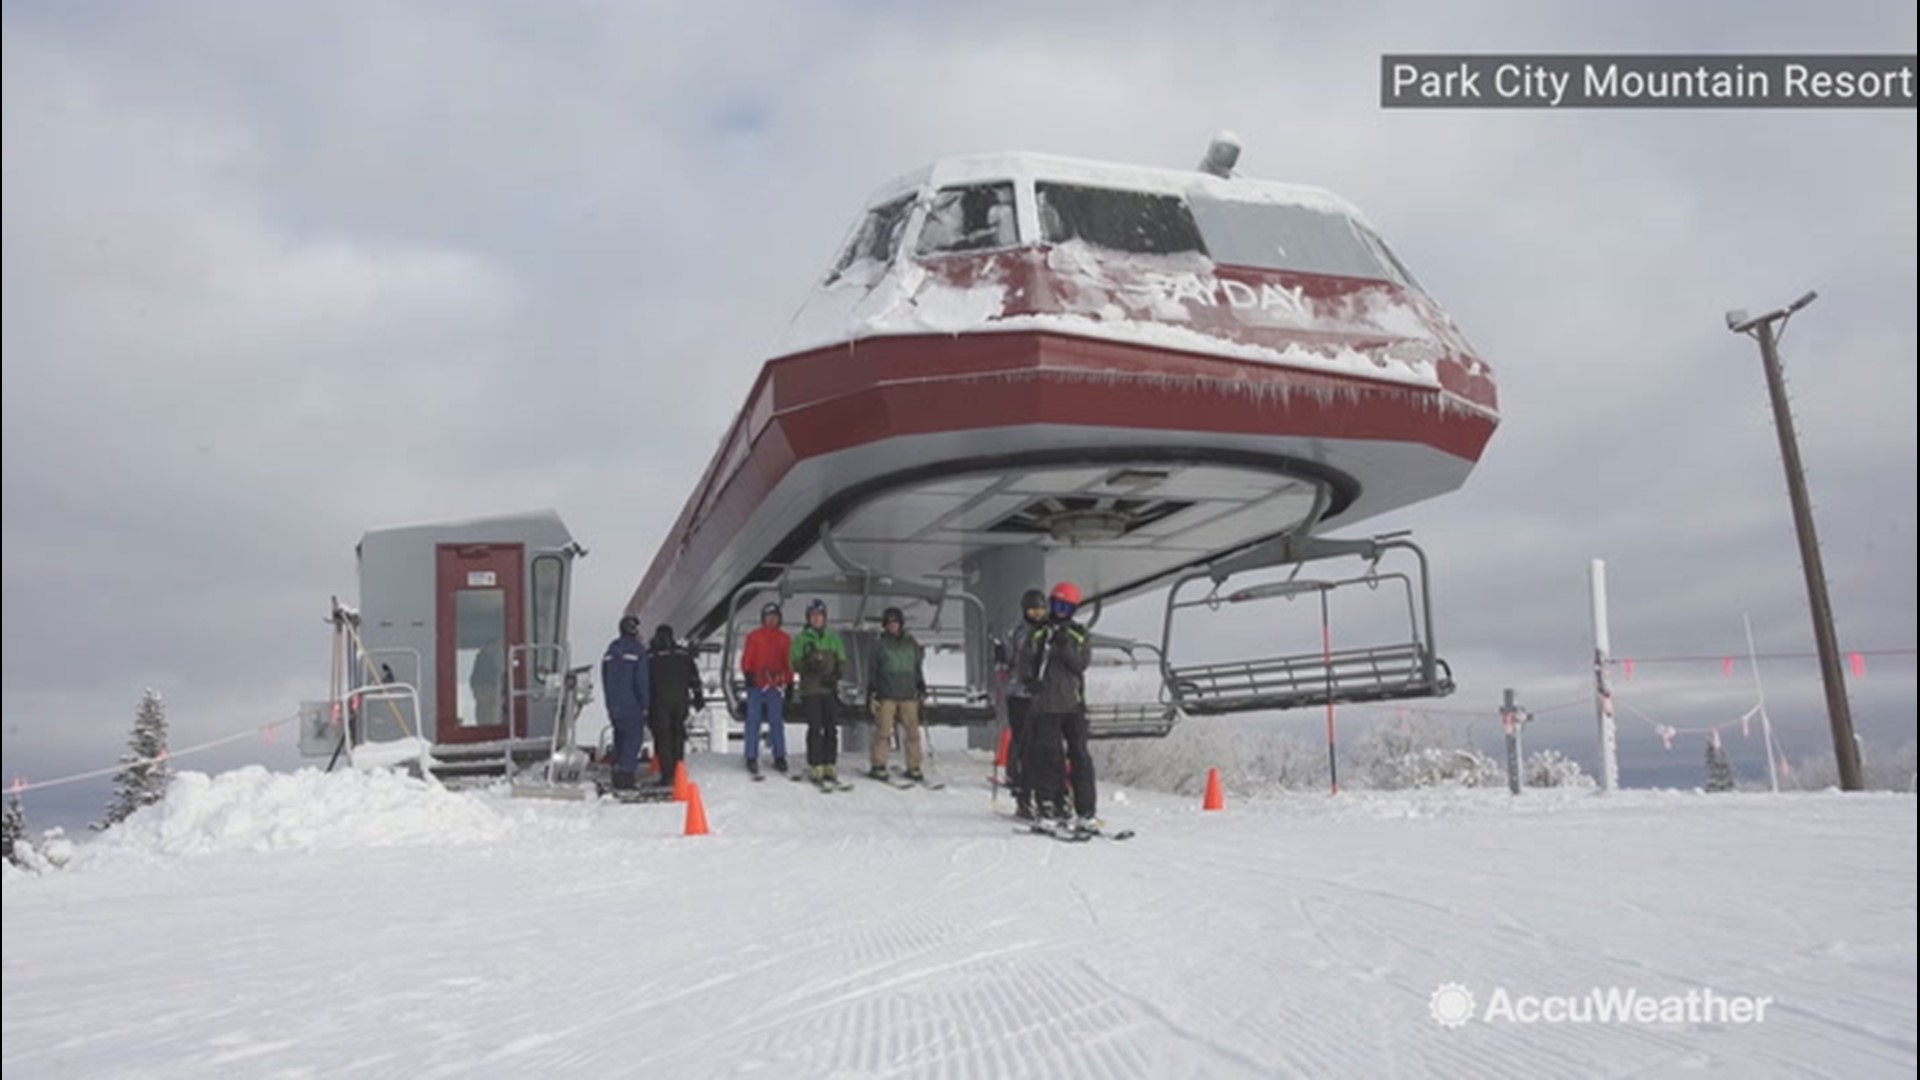 Park City Mountain Resort started their lifts on Nov. 22, kicking off the beginning of ski and snowboard season. Many excited guests were there to get their first runs of the season.